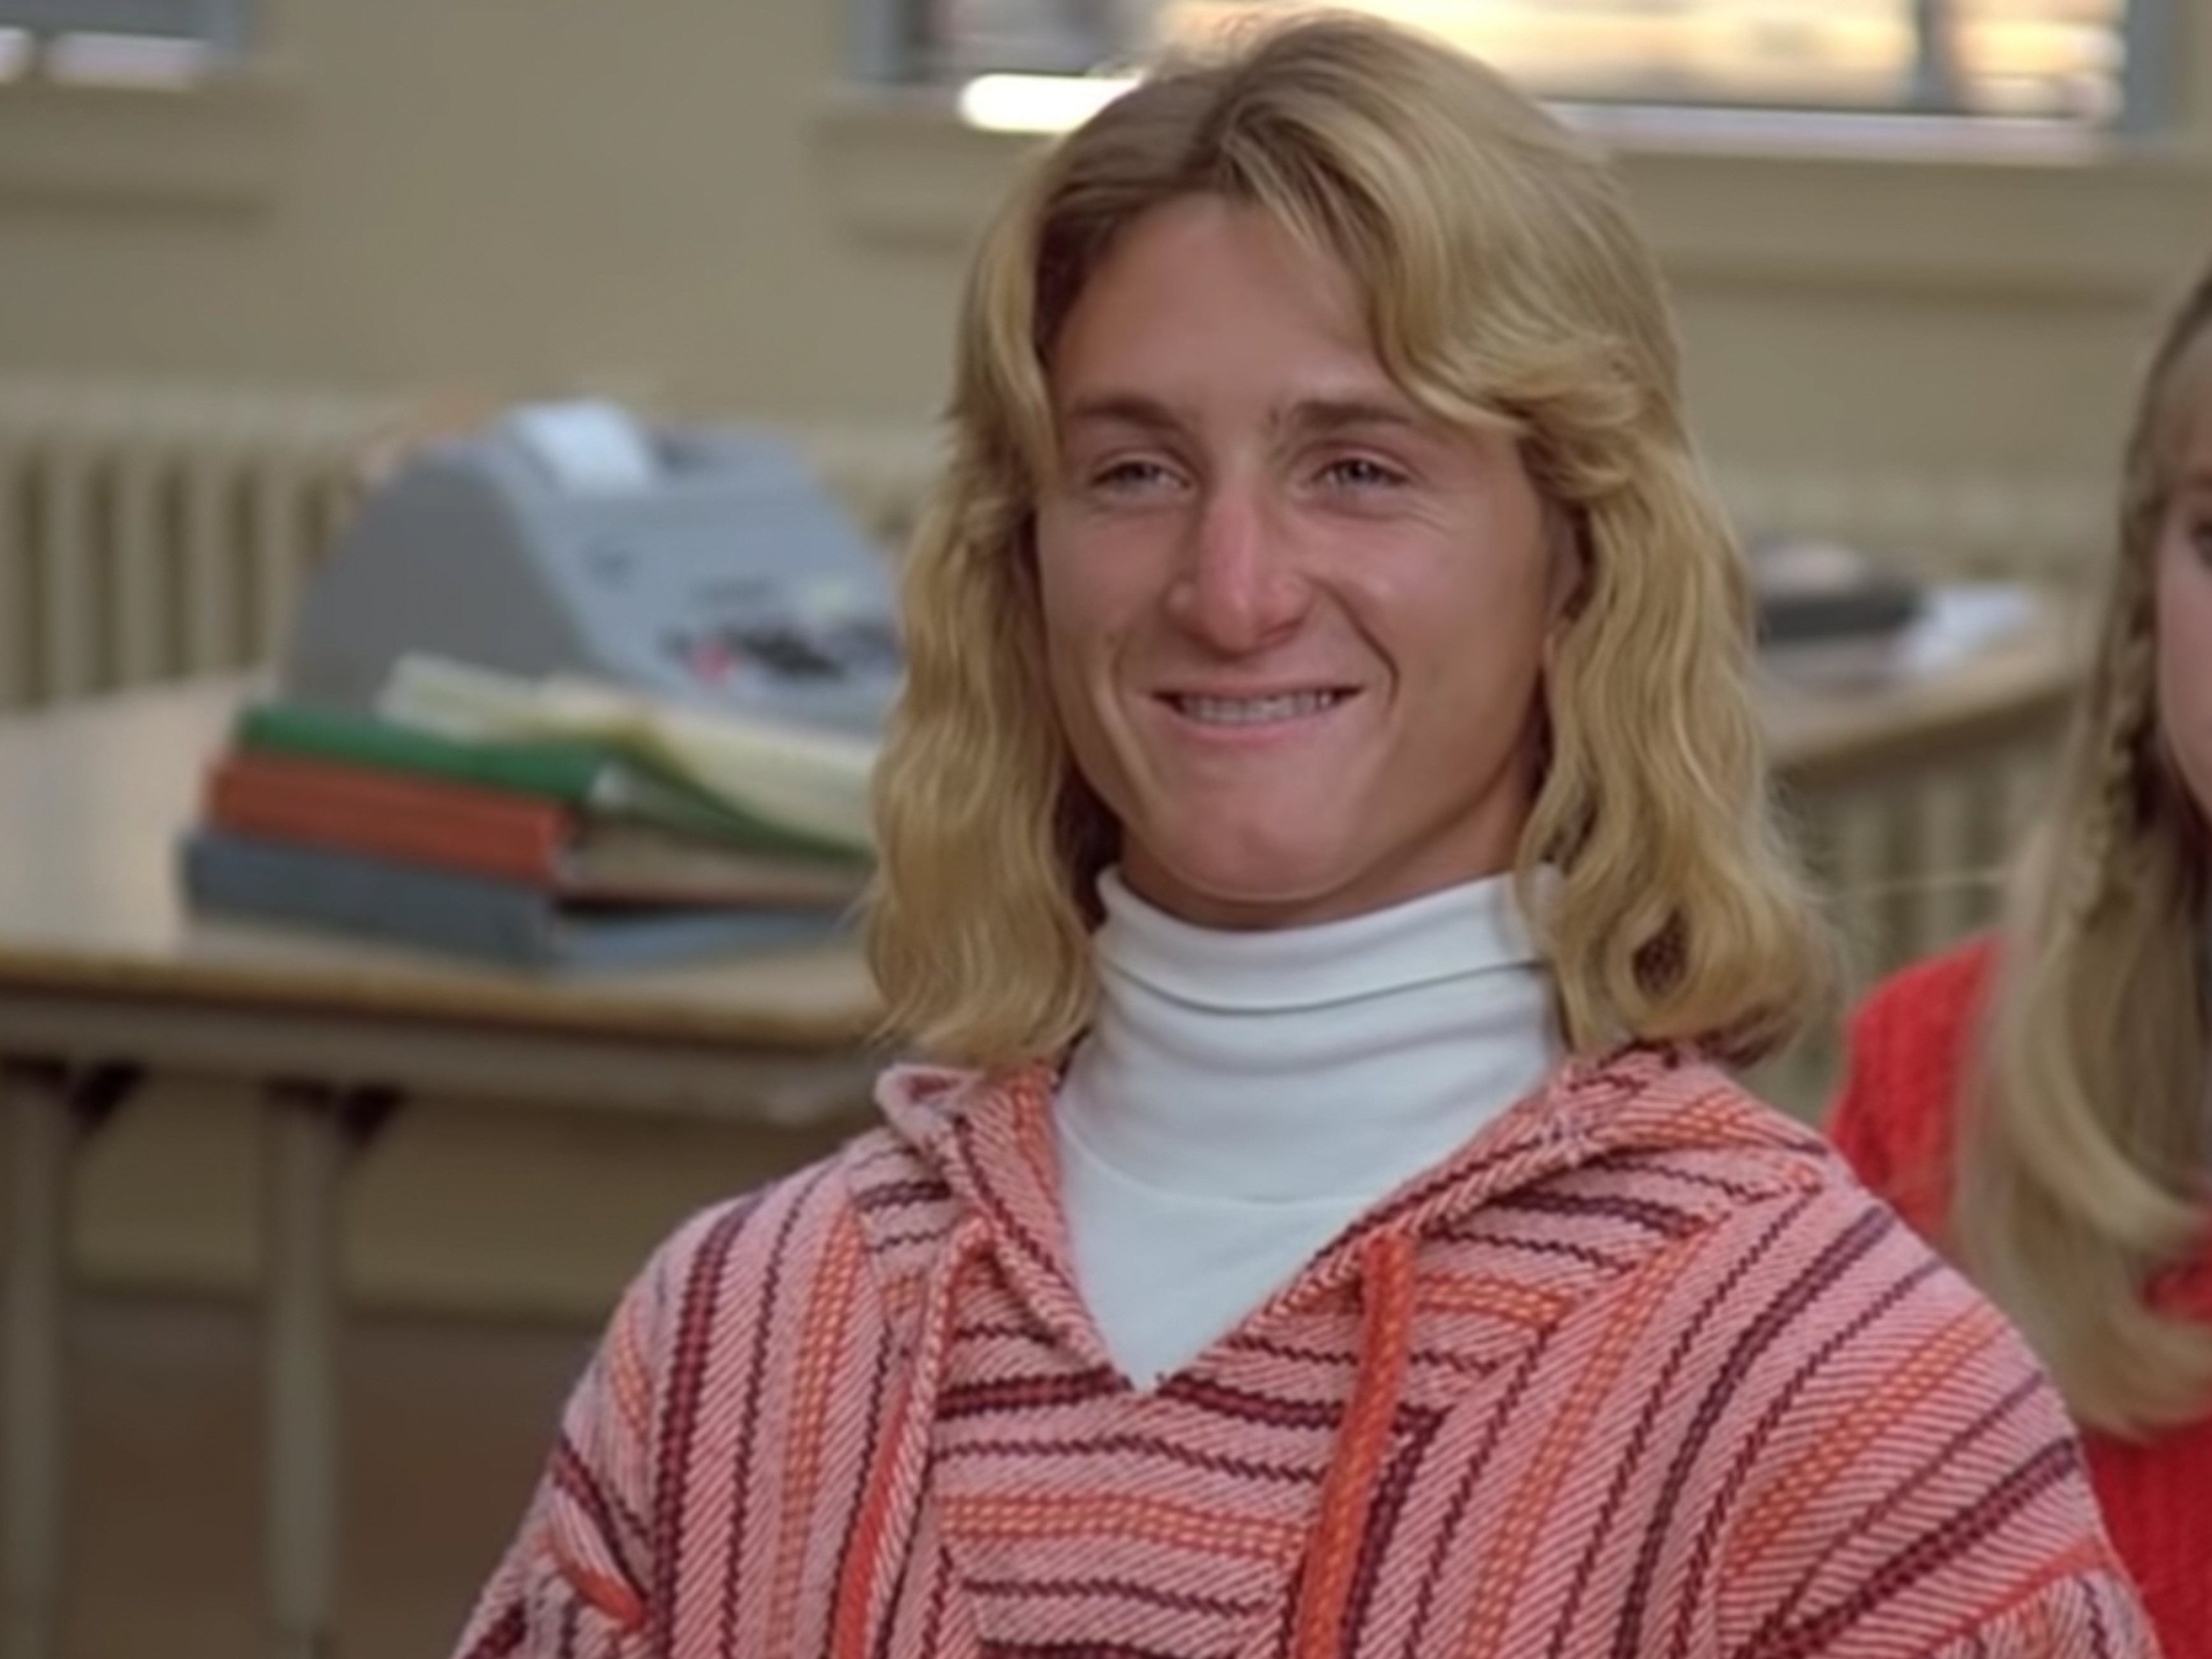 fast times at ridgemont high characters